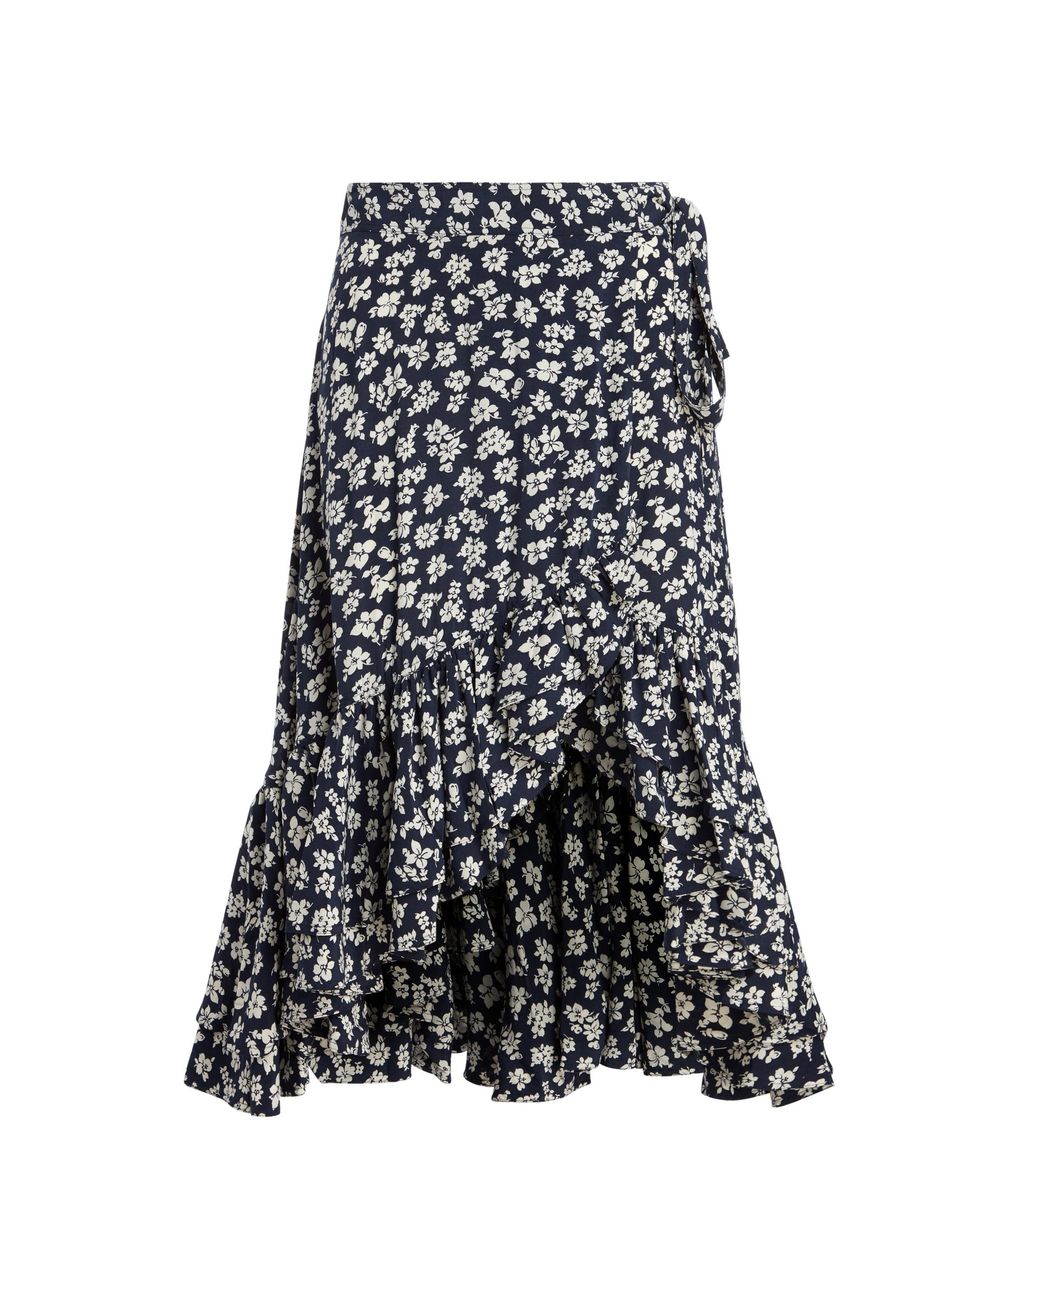 Polo Ralph Lauren Floral Crepe Wrap Skirt in Navy/Cream Floral (Blue ...